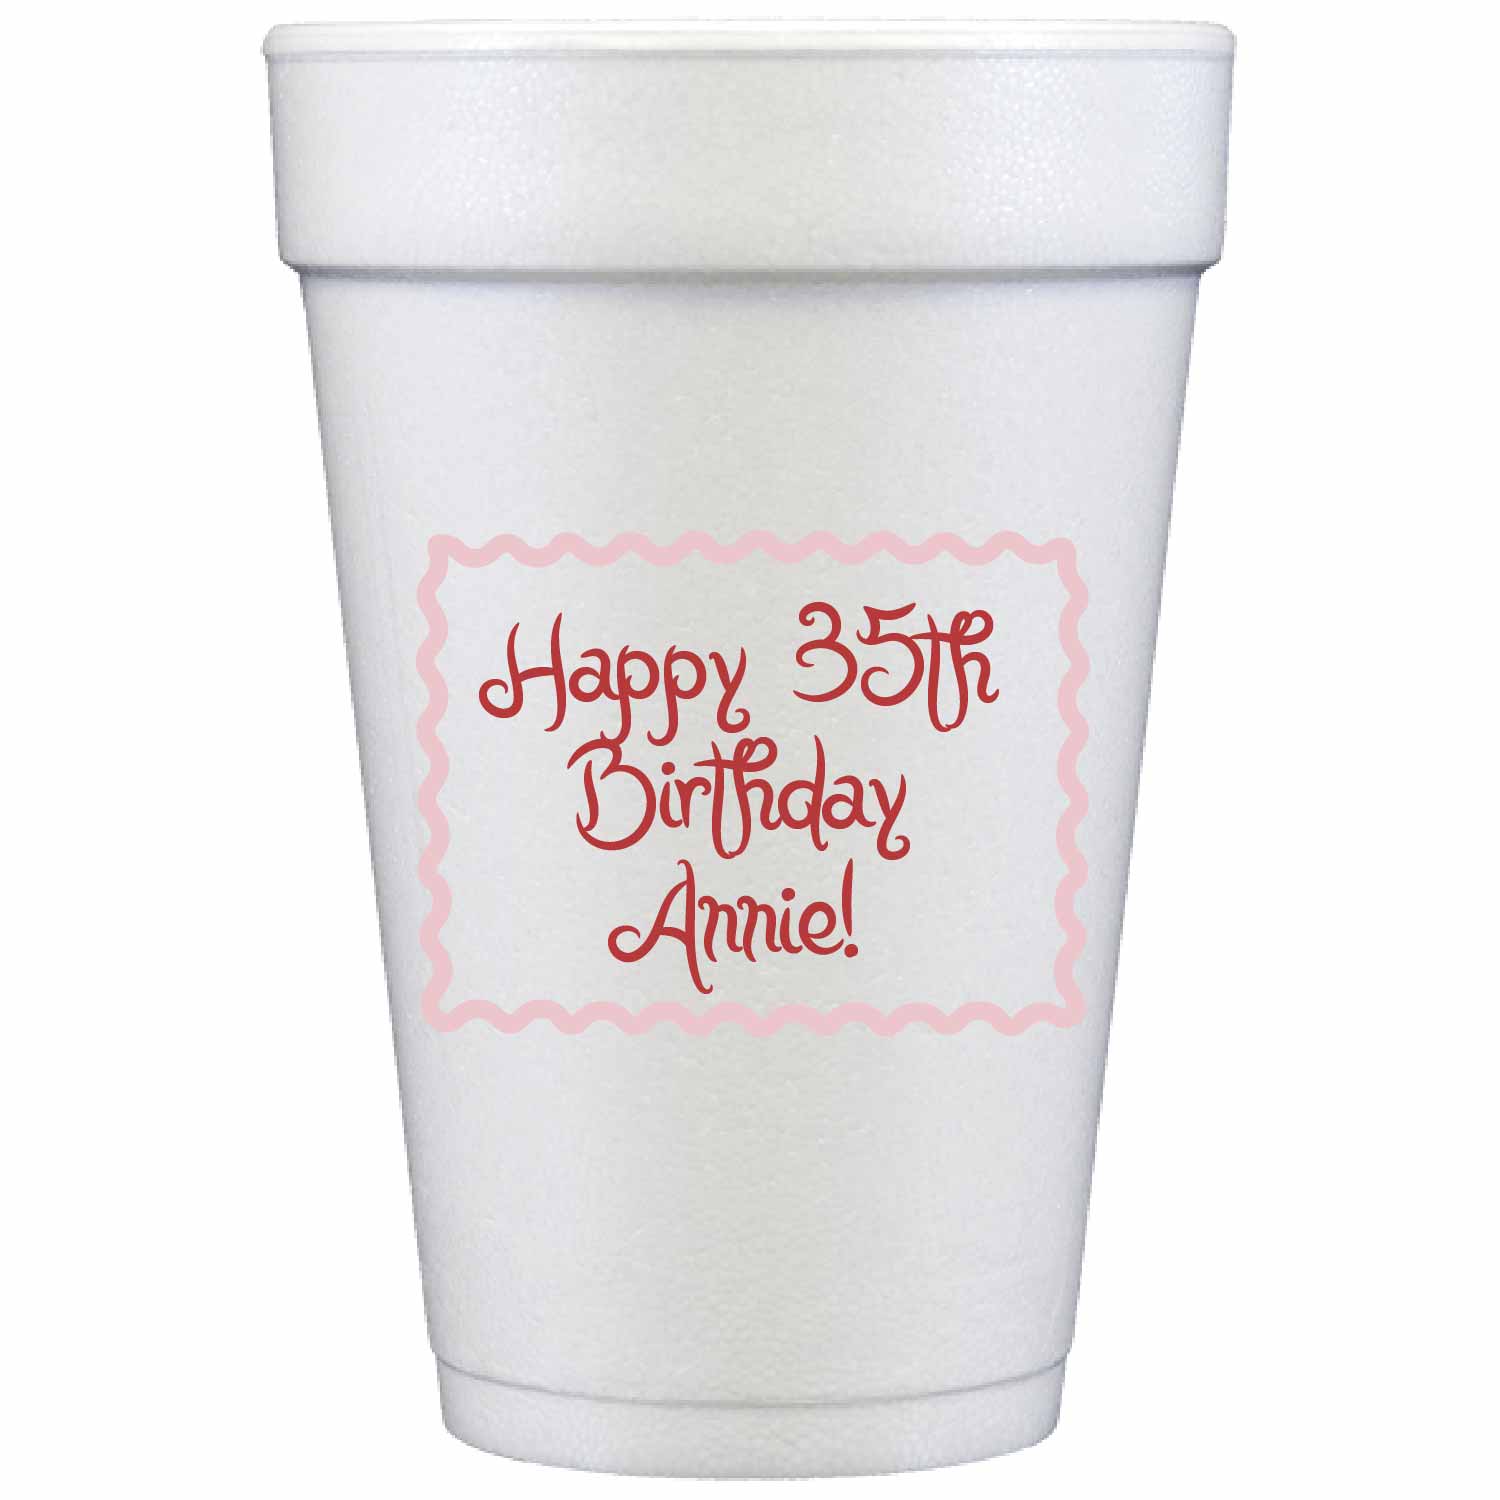 green border personalized styrofoam cup